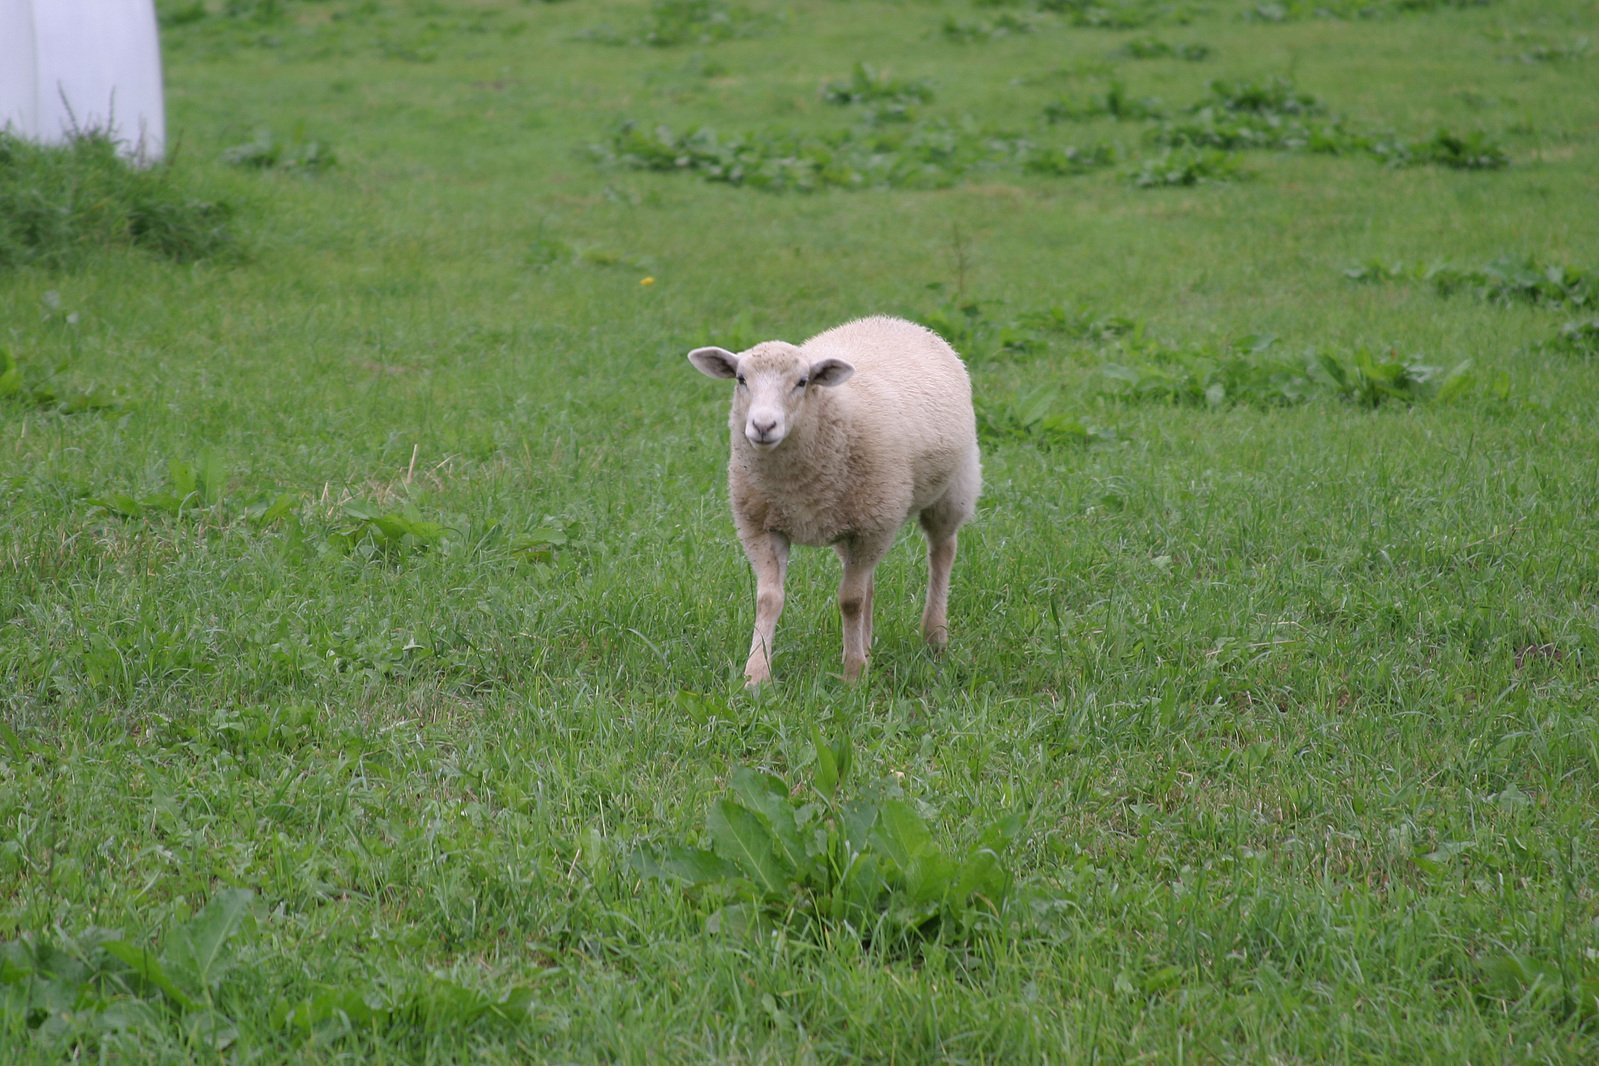 there is a small sheep that is standing in the grass